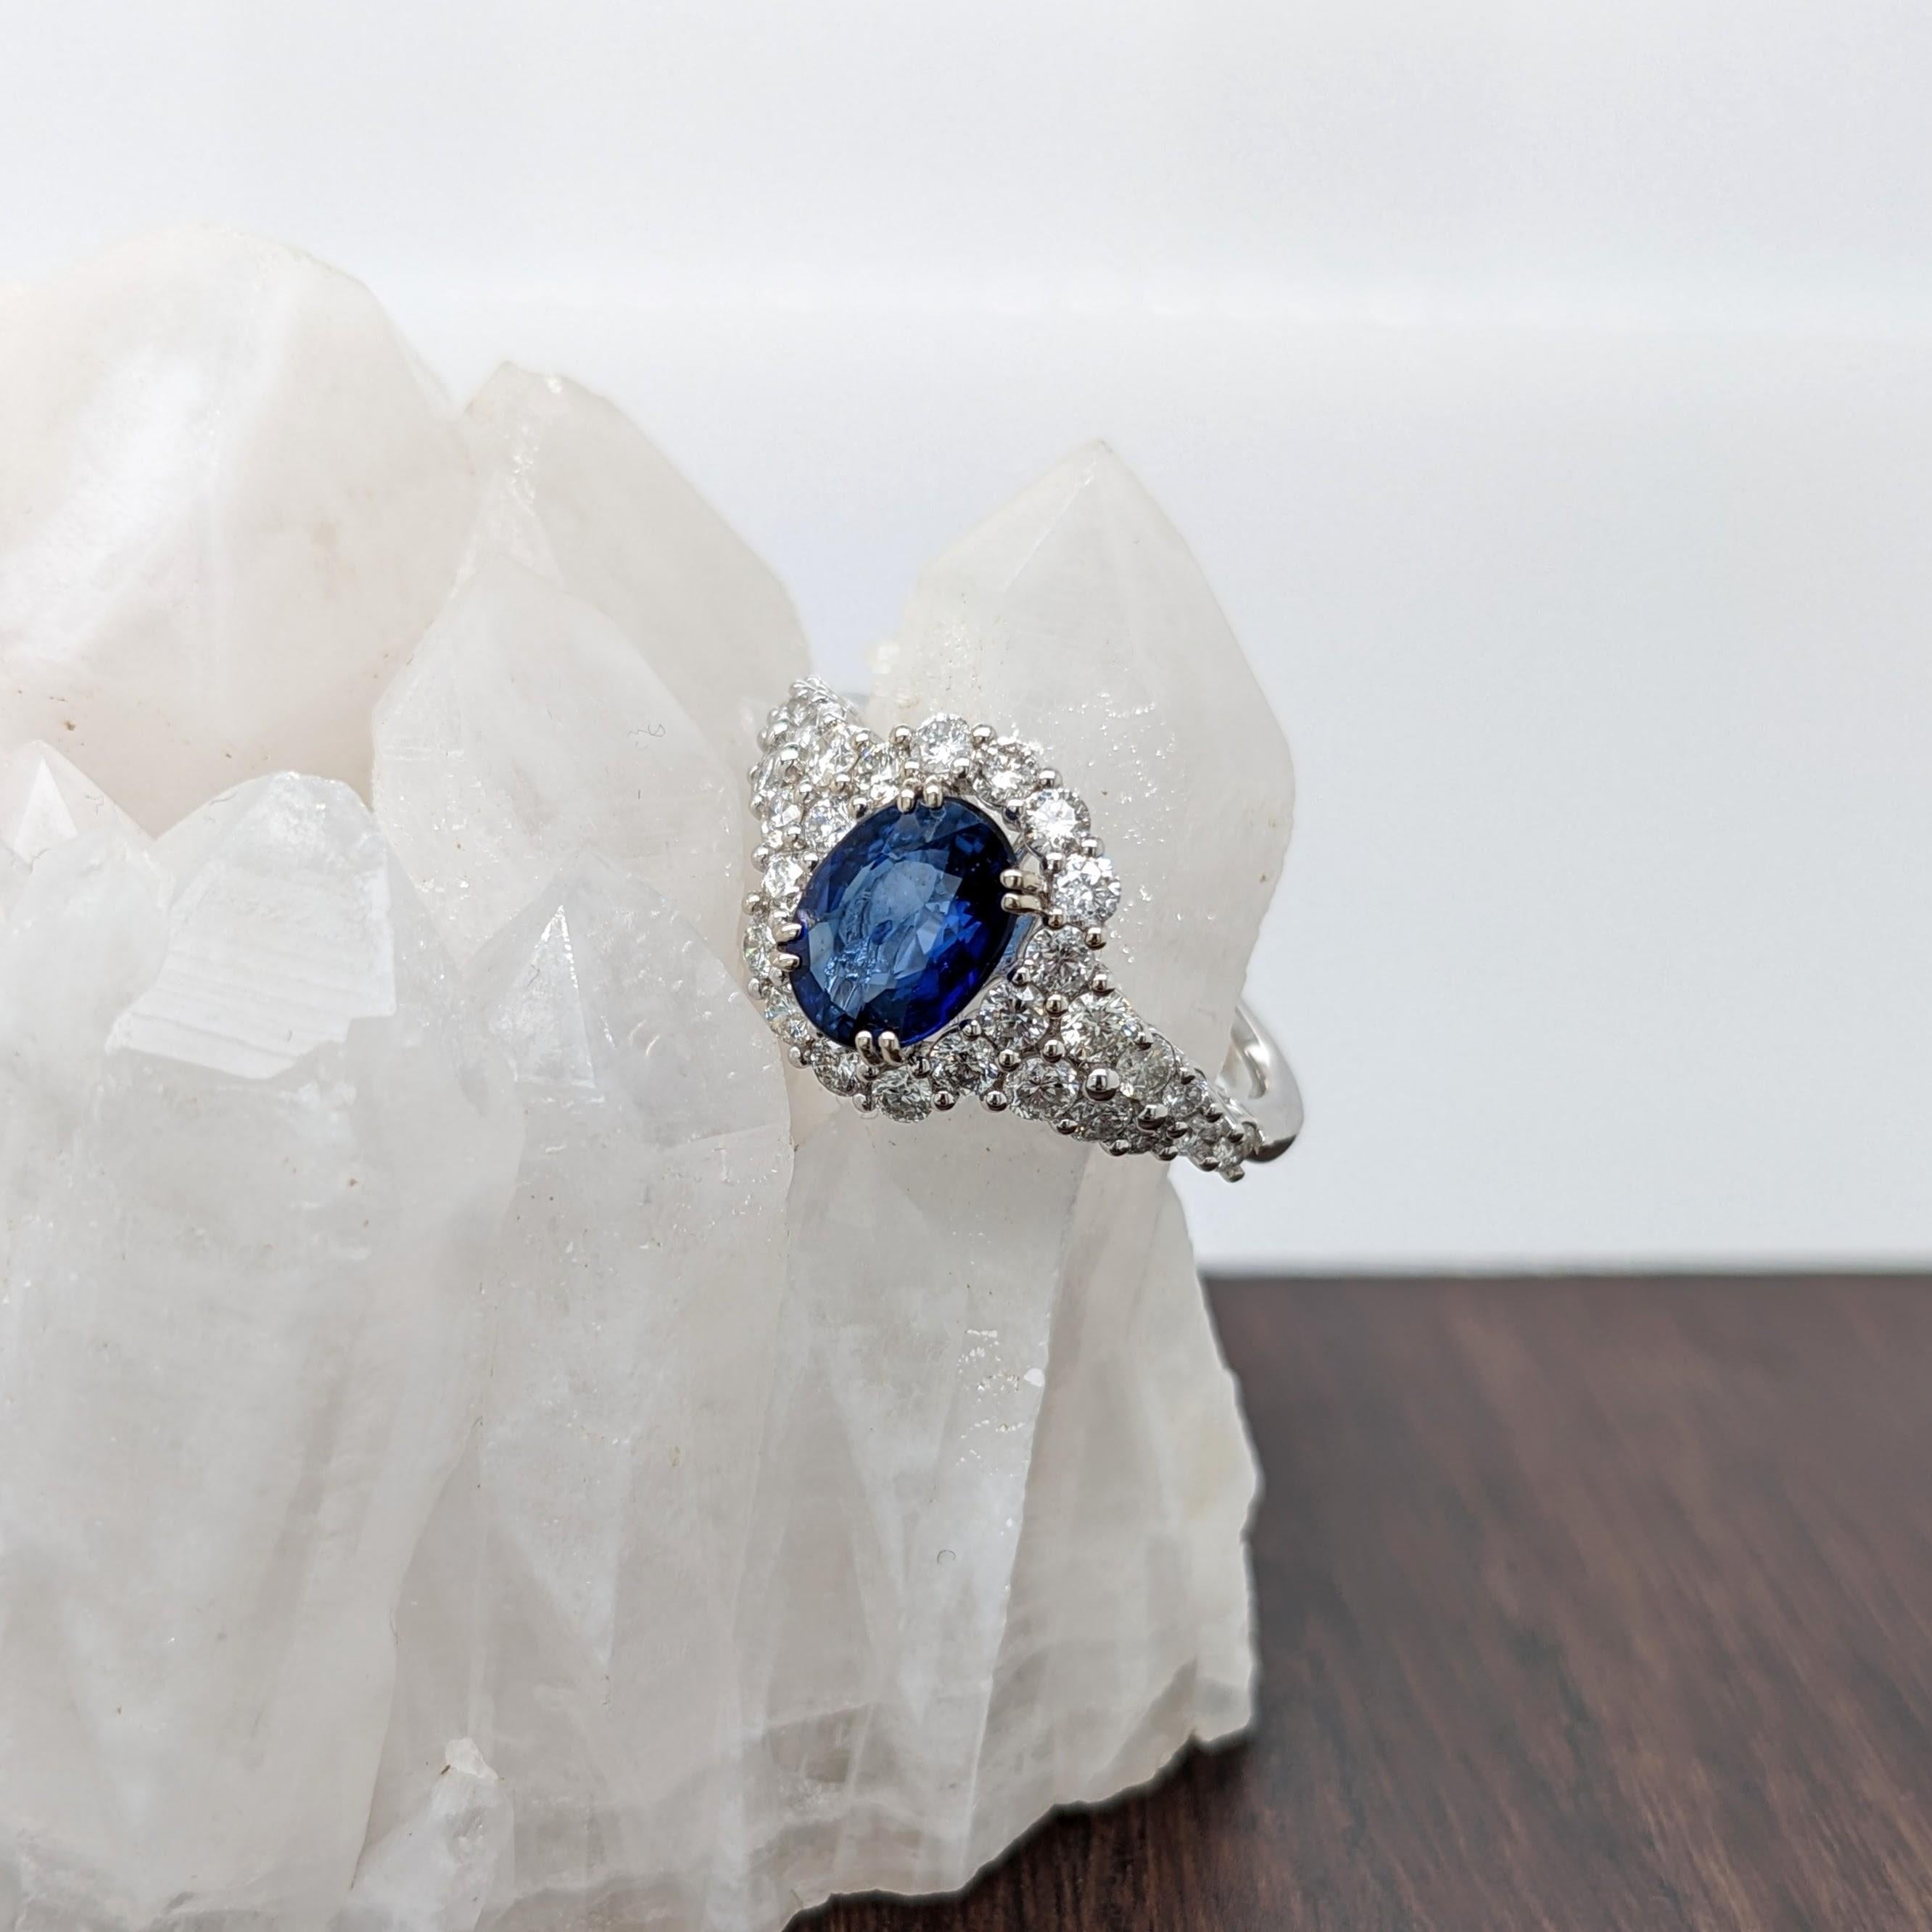 This ring design is a tried and tested NNJ Designs favorite! Featuring a gorgeous Ceylon blue sapphire with a stunning diamond halo and accented shank that elevates this ring to a gorgeous statement piece, all set in solid 14k white gold.

Item